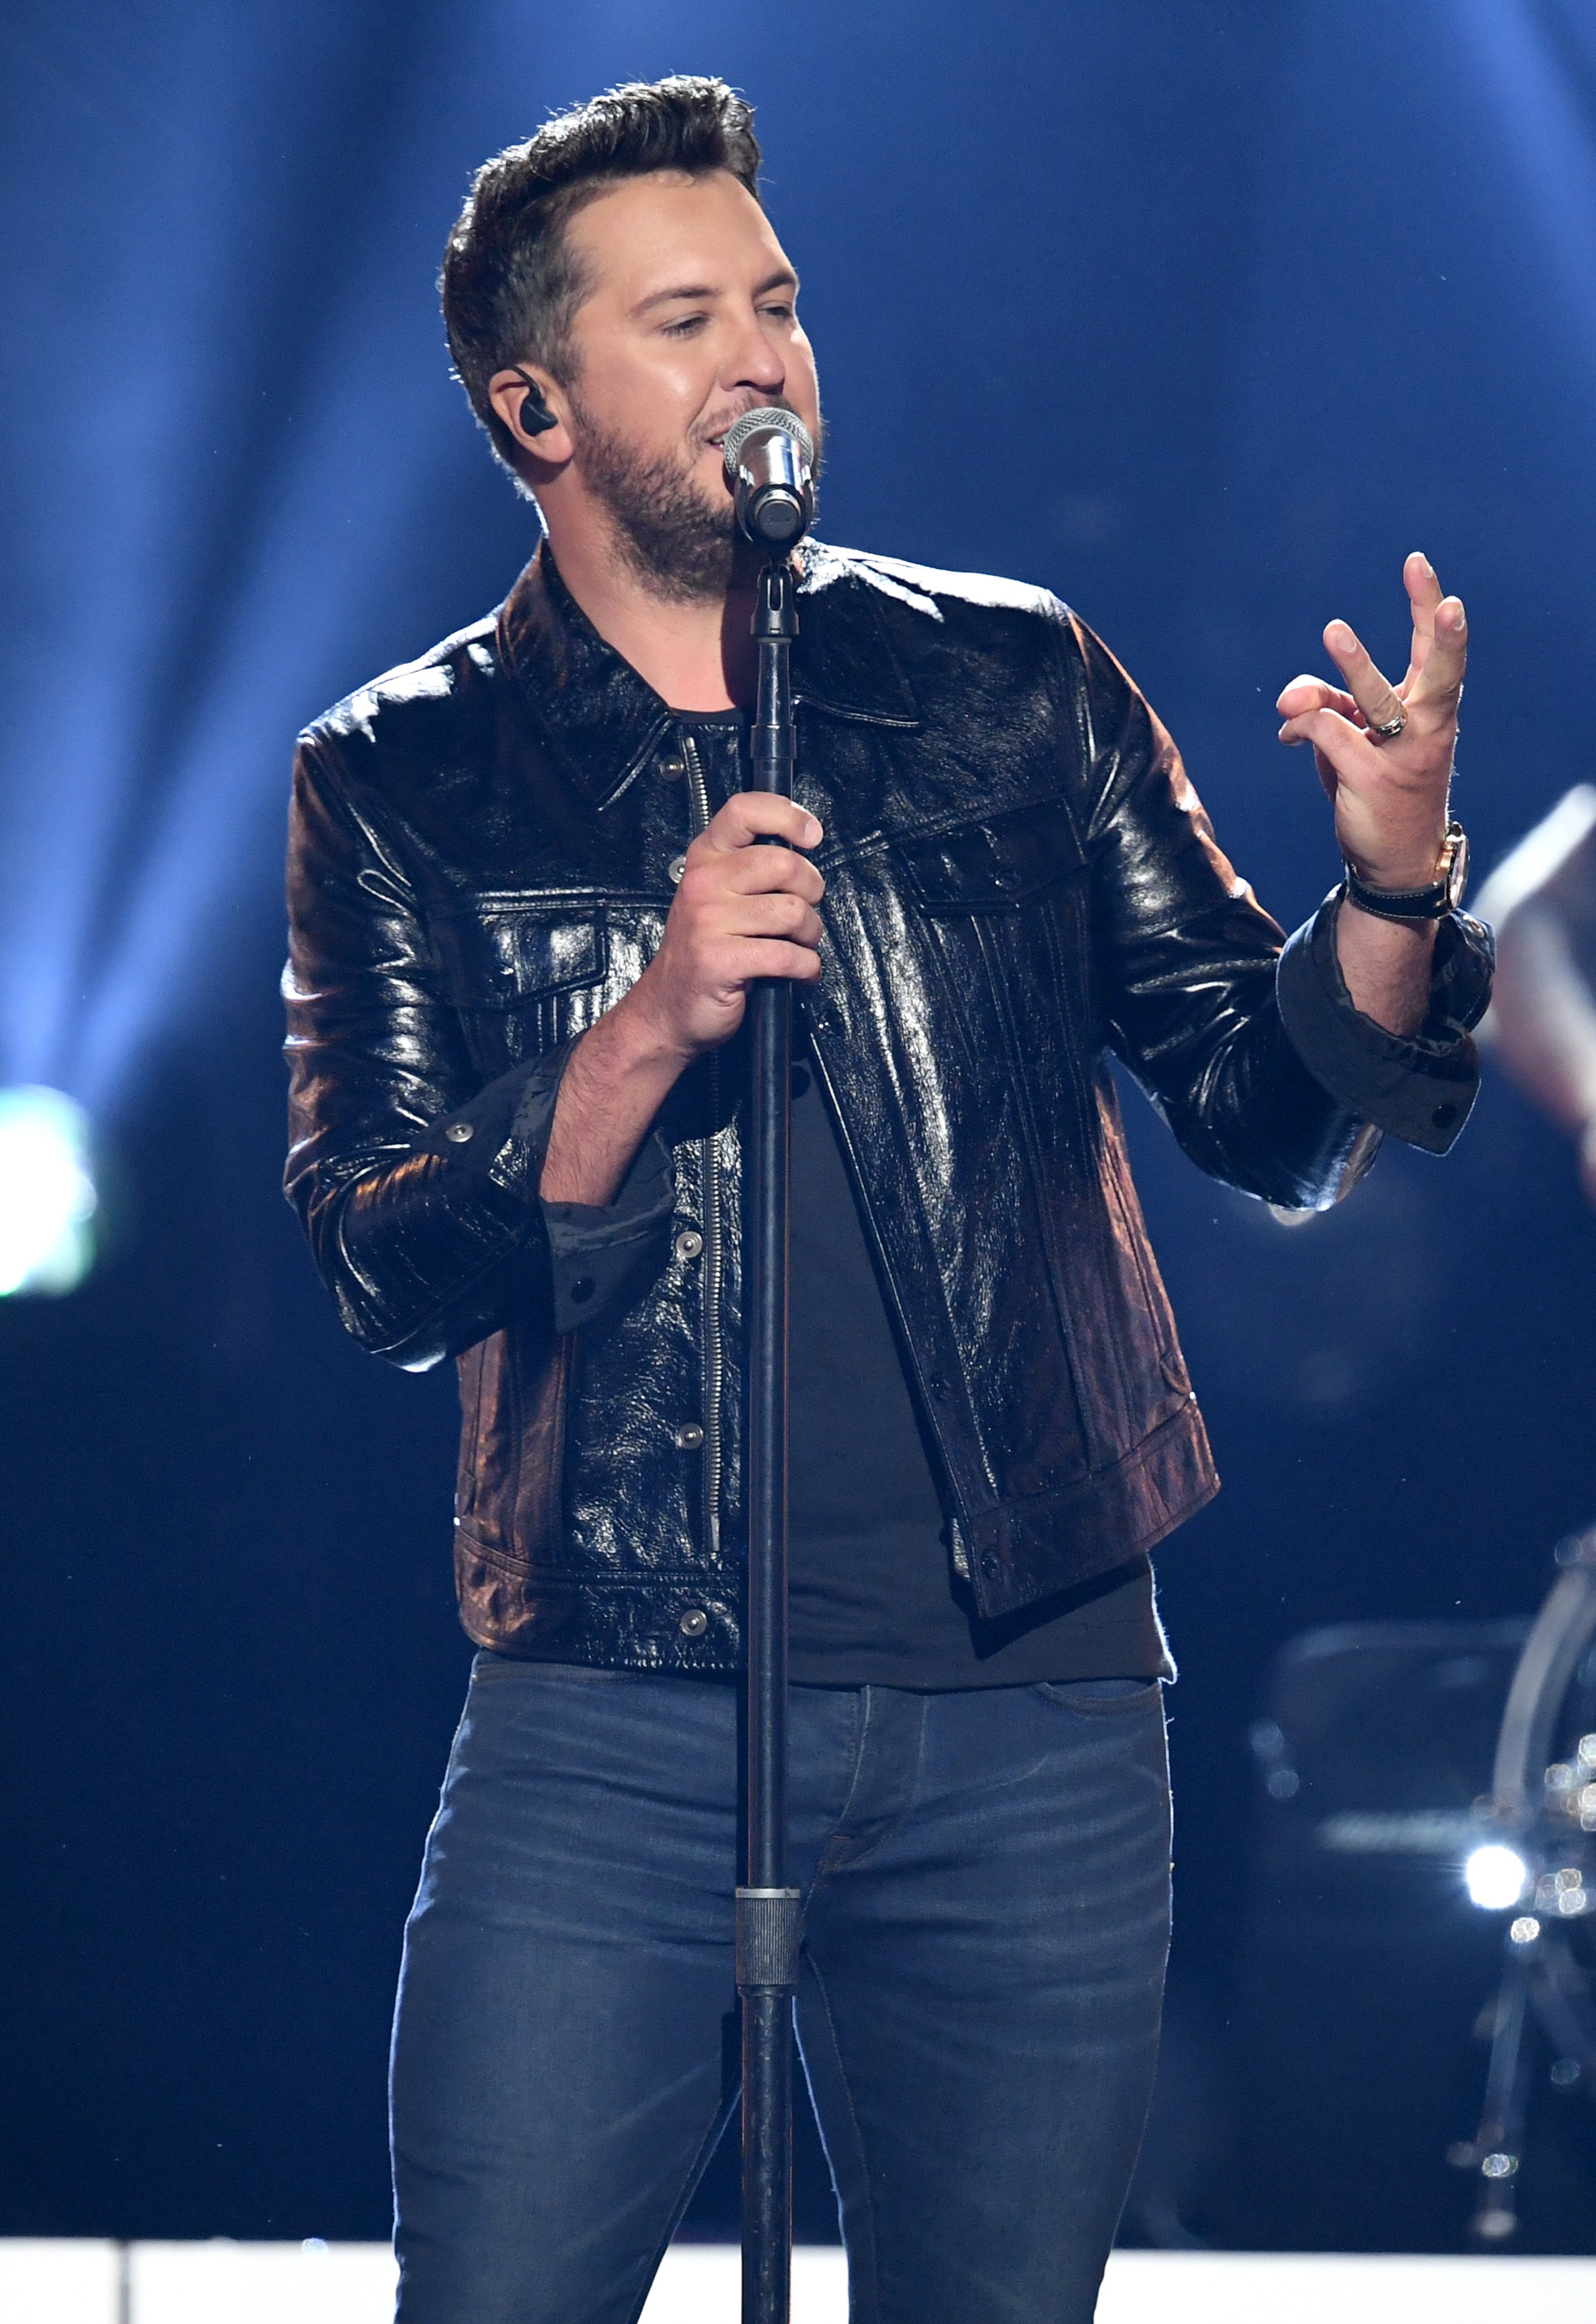 "American Idol" judge Luke Bryan has been one of the most successful country artist in the music industry. | Photo: Getty Images